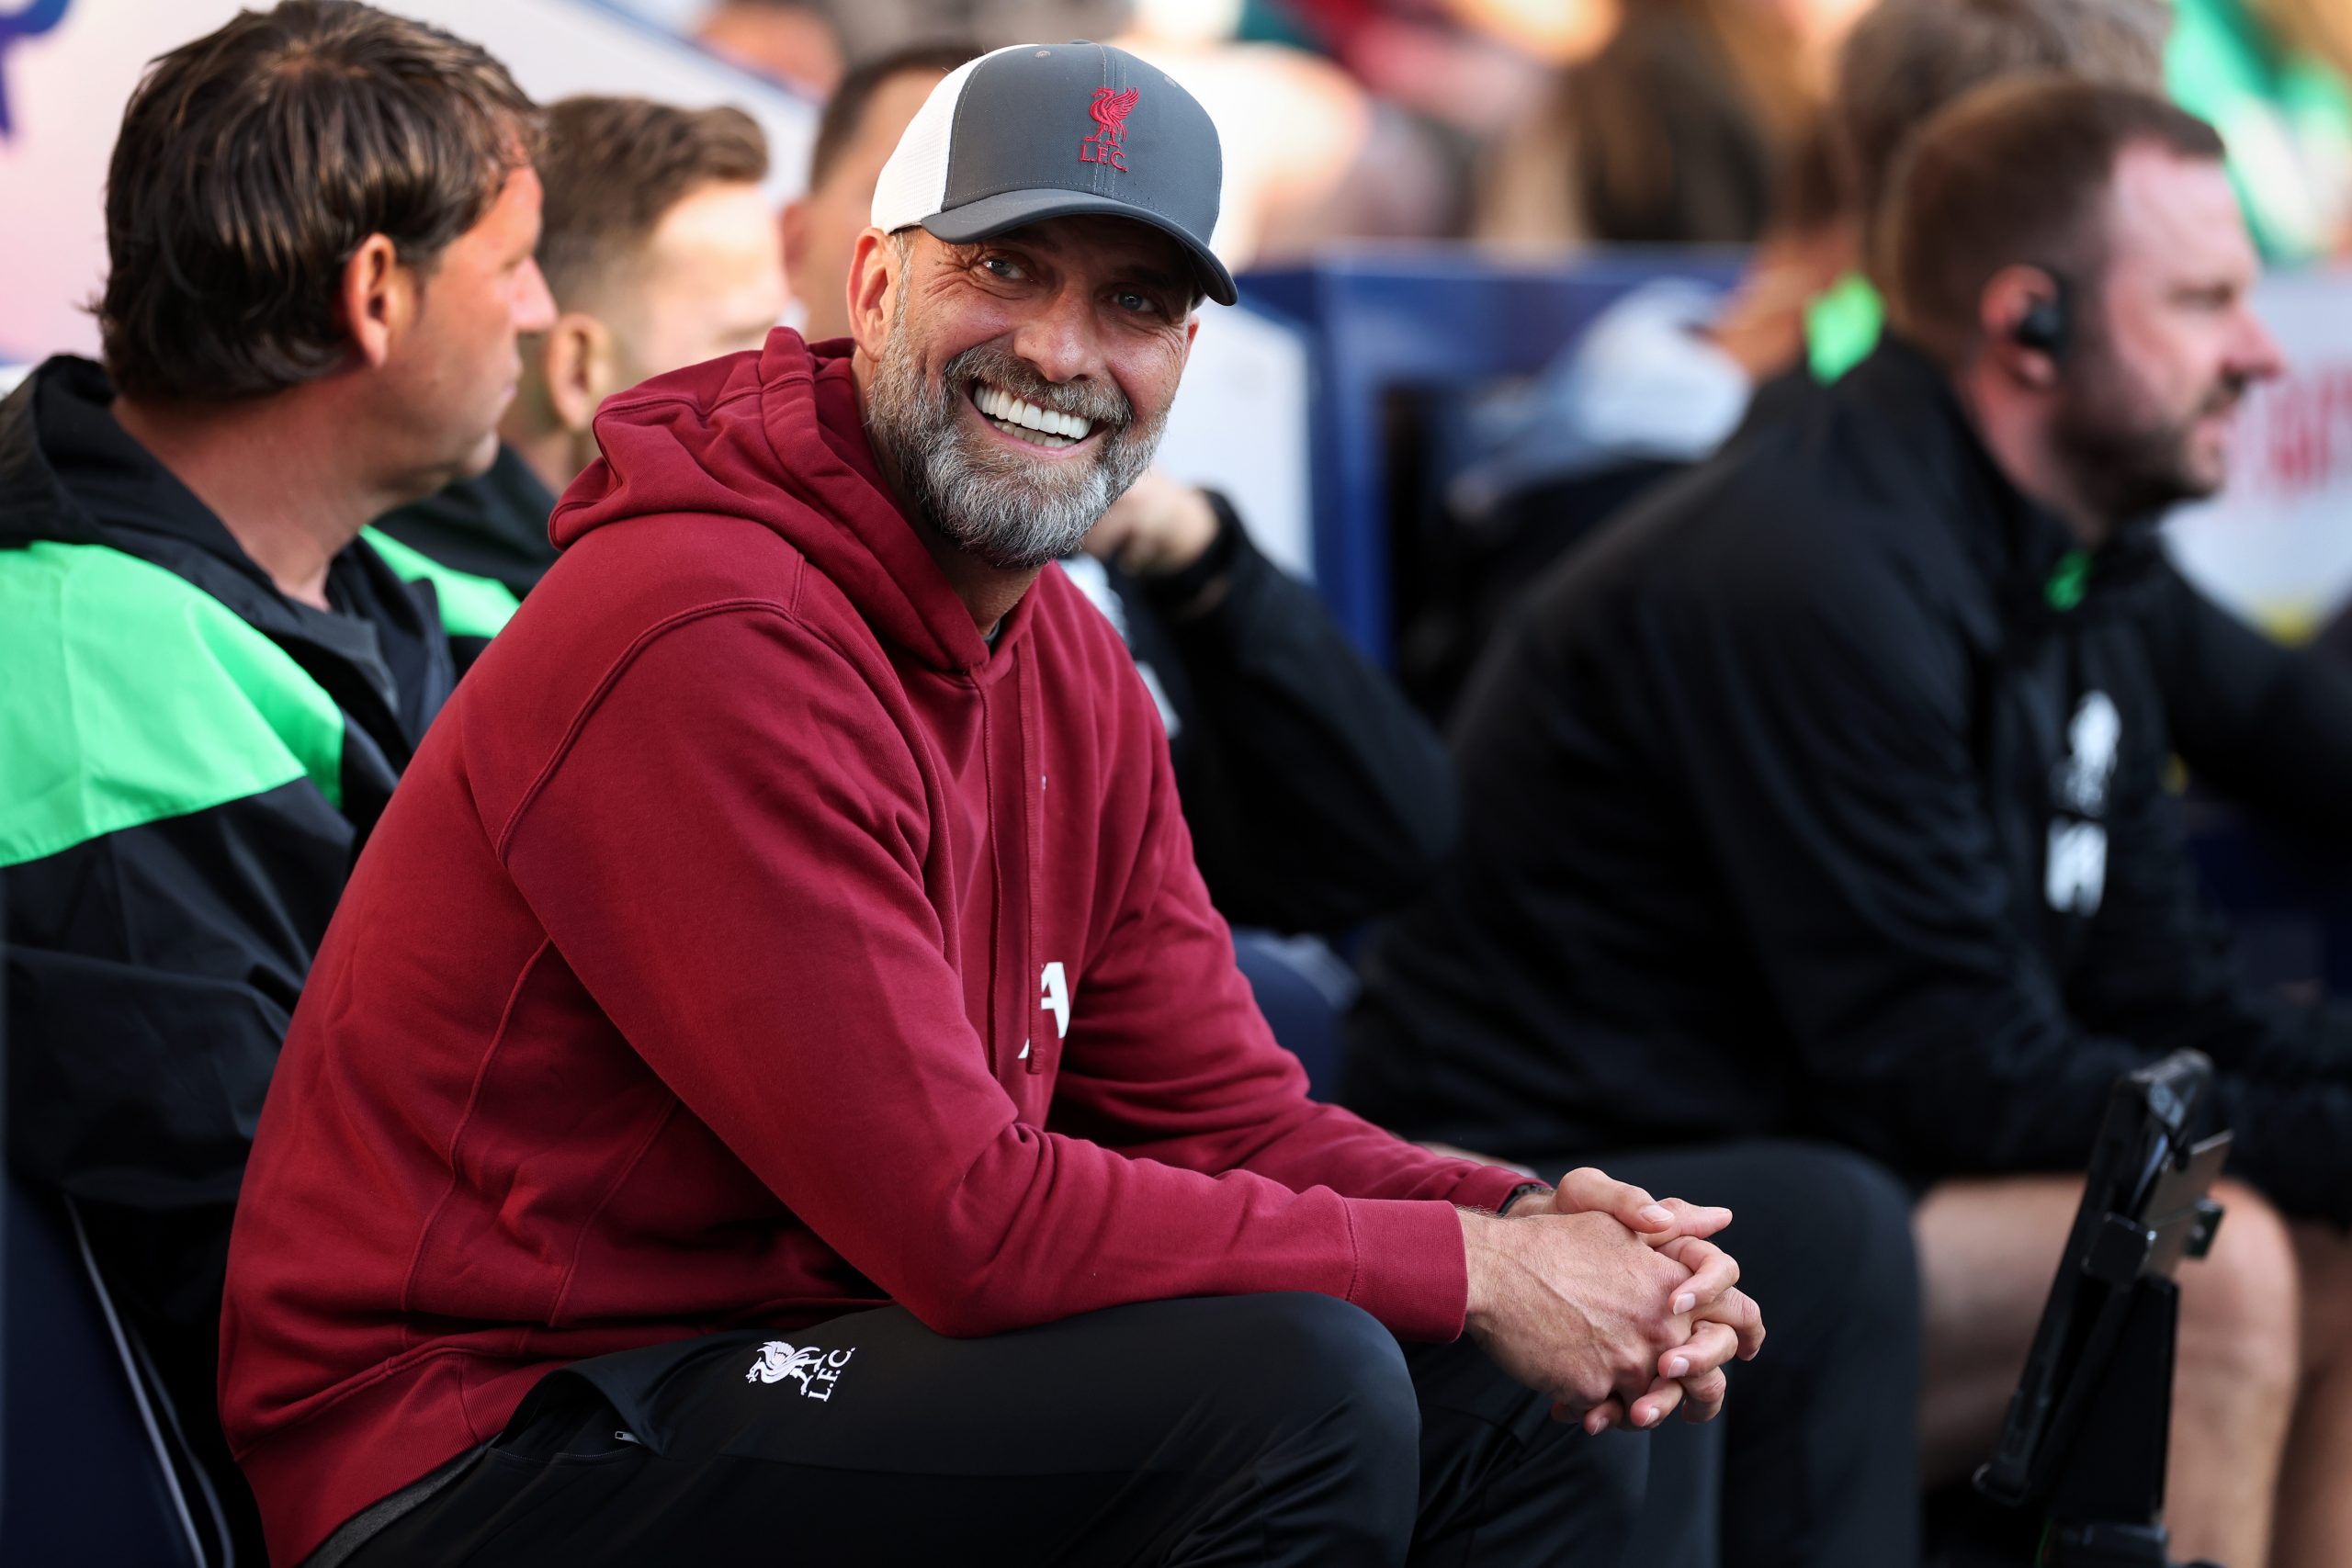 PRESTON, ENGLAND - AUGUST 07: Jurgen Klopp the manager of Liverpool FC looks on prior to the pre-season friendly match between Liverpool FC and SV Darmstadt 98 at Deepdale on August 07, 2023 in England. (Photo by Alex Livesey/Getty Images)